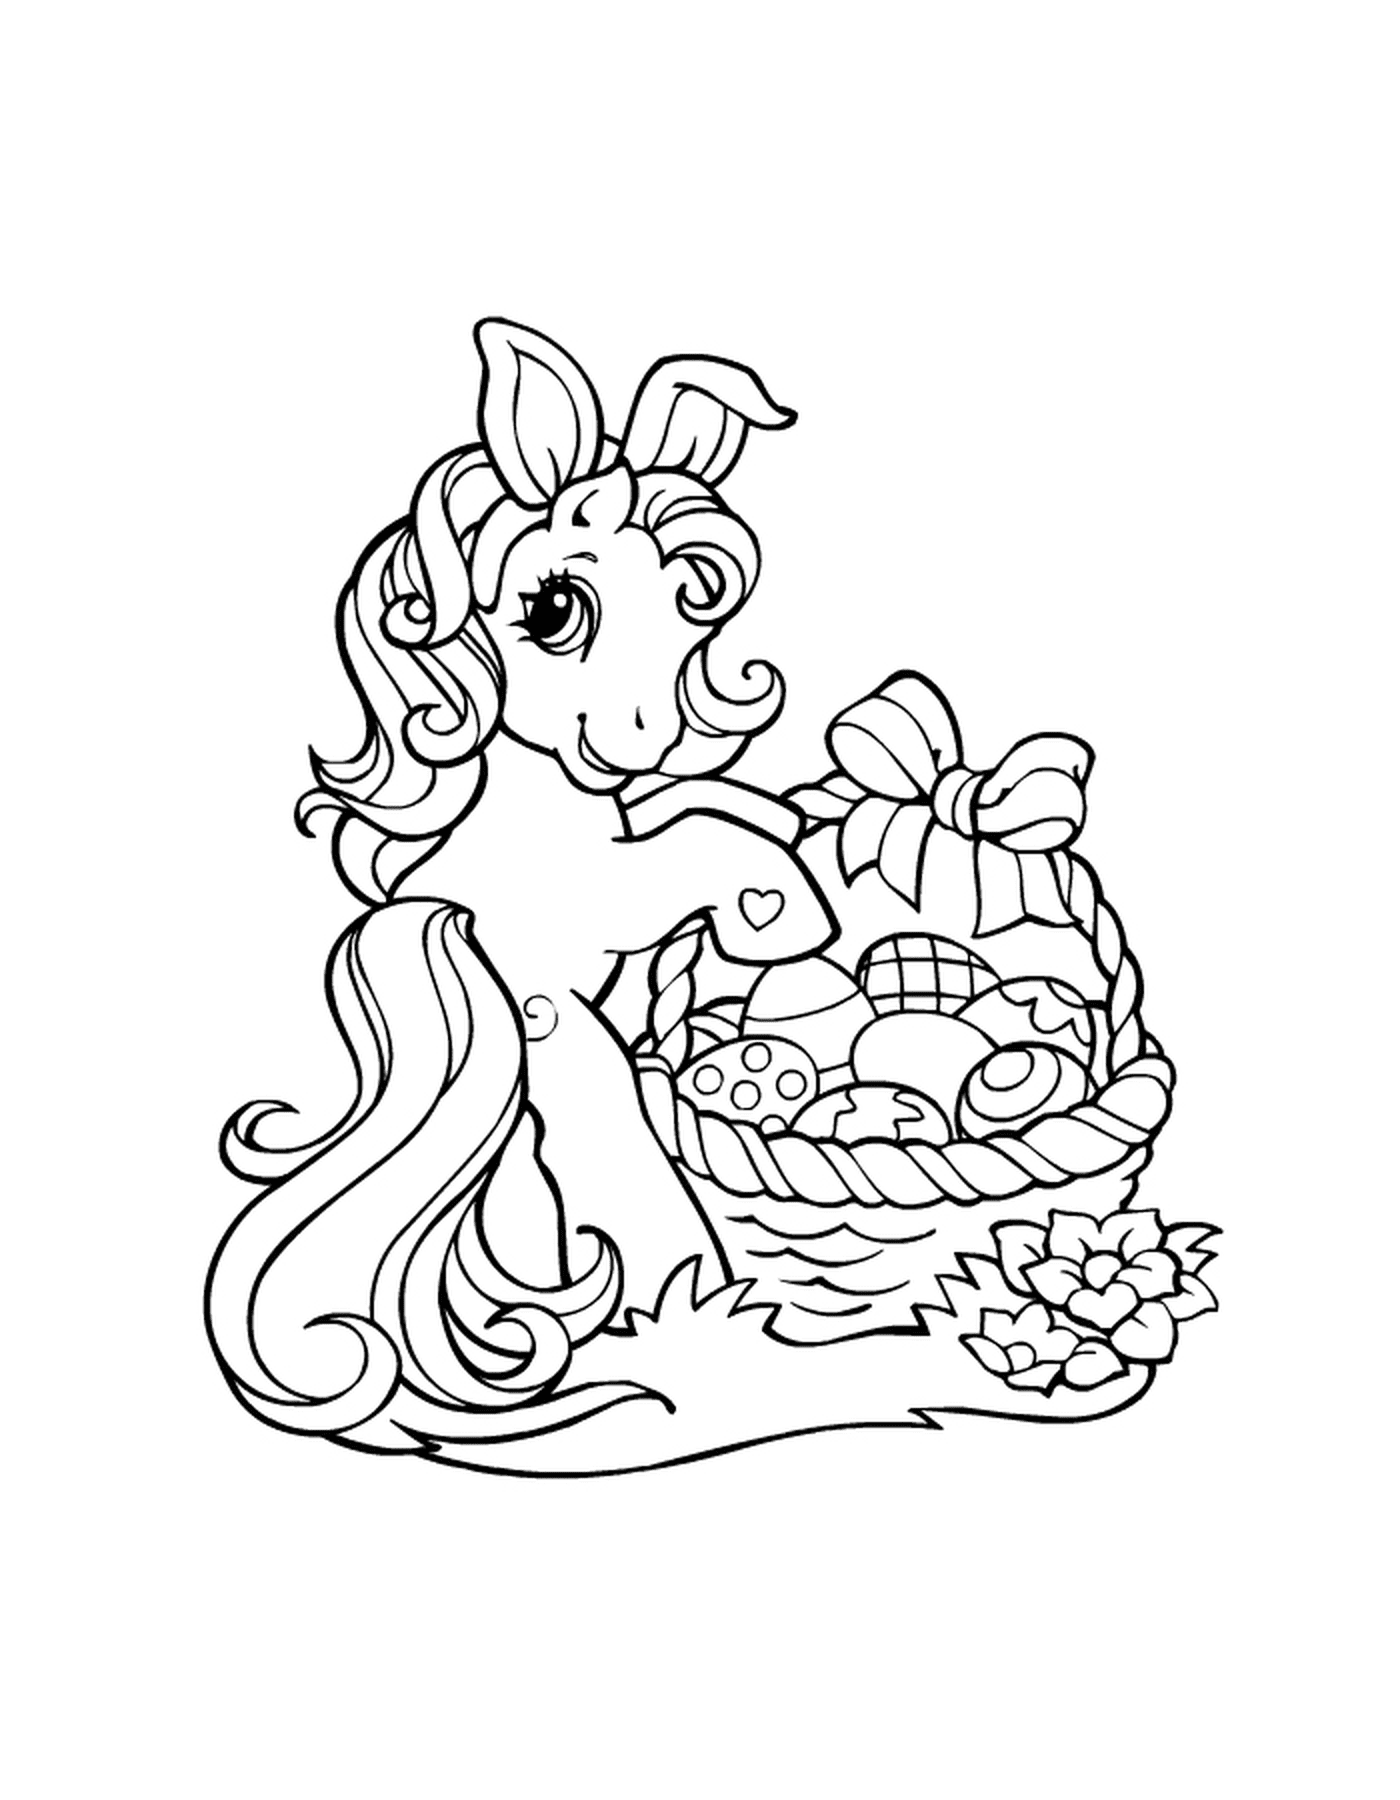  A pony holding a basket of Easter eggs 